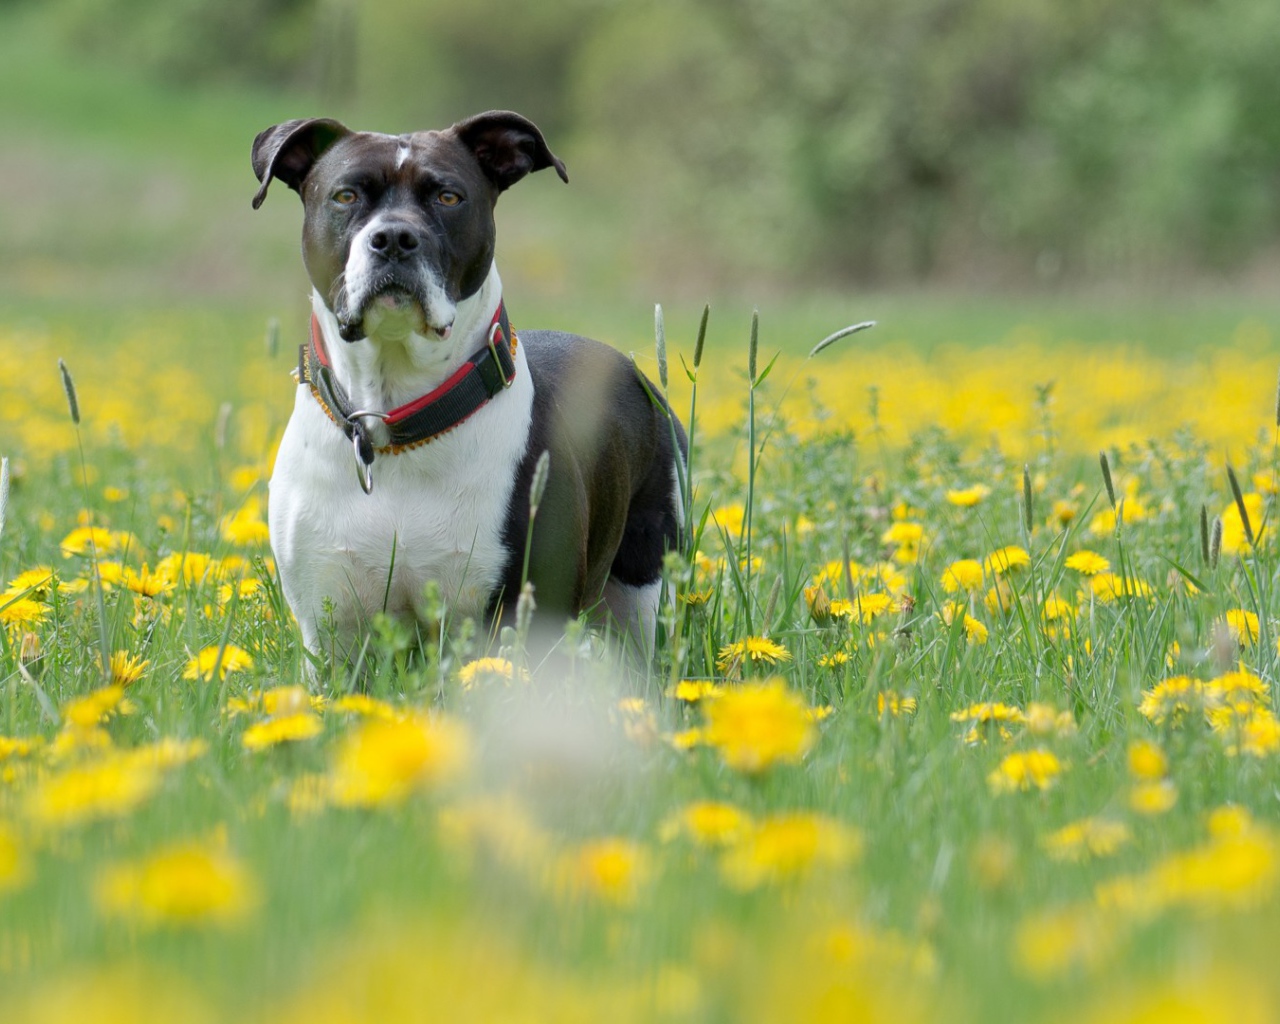 Dog and dandelions